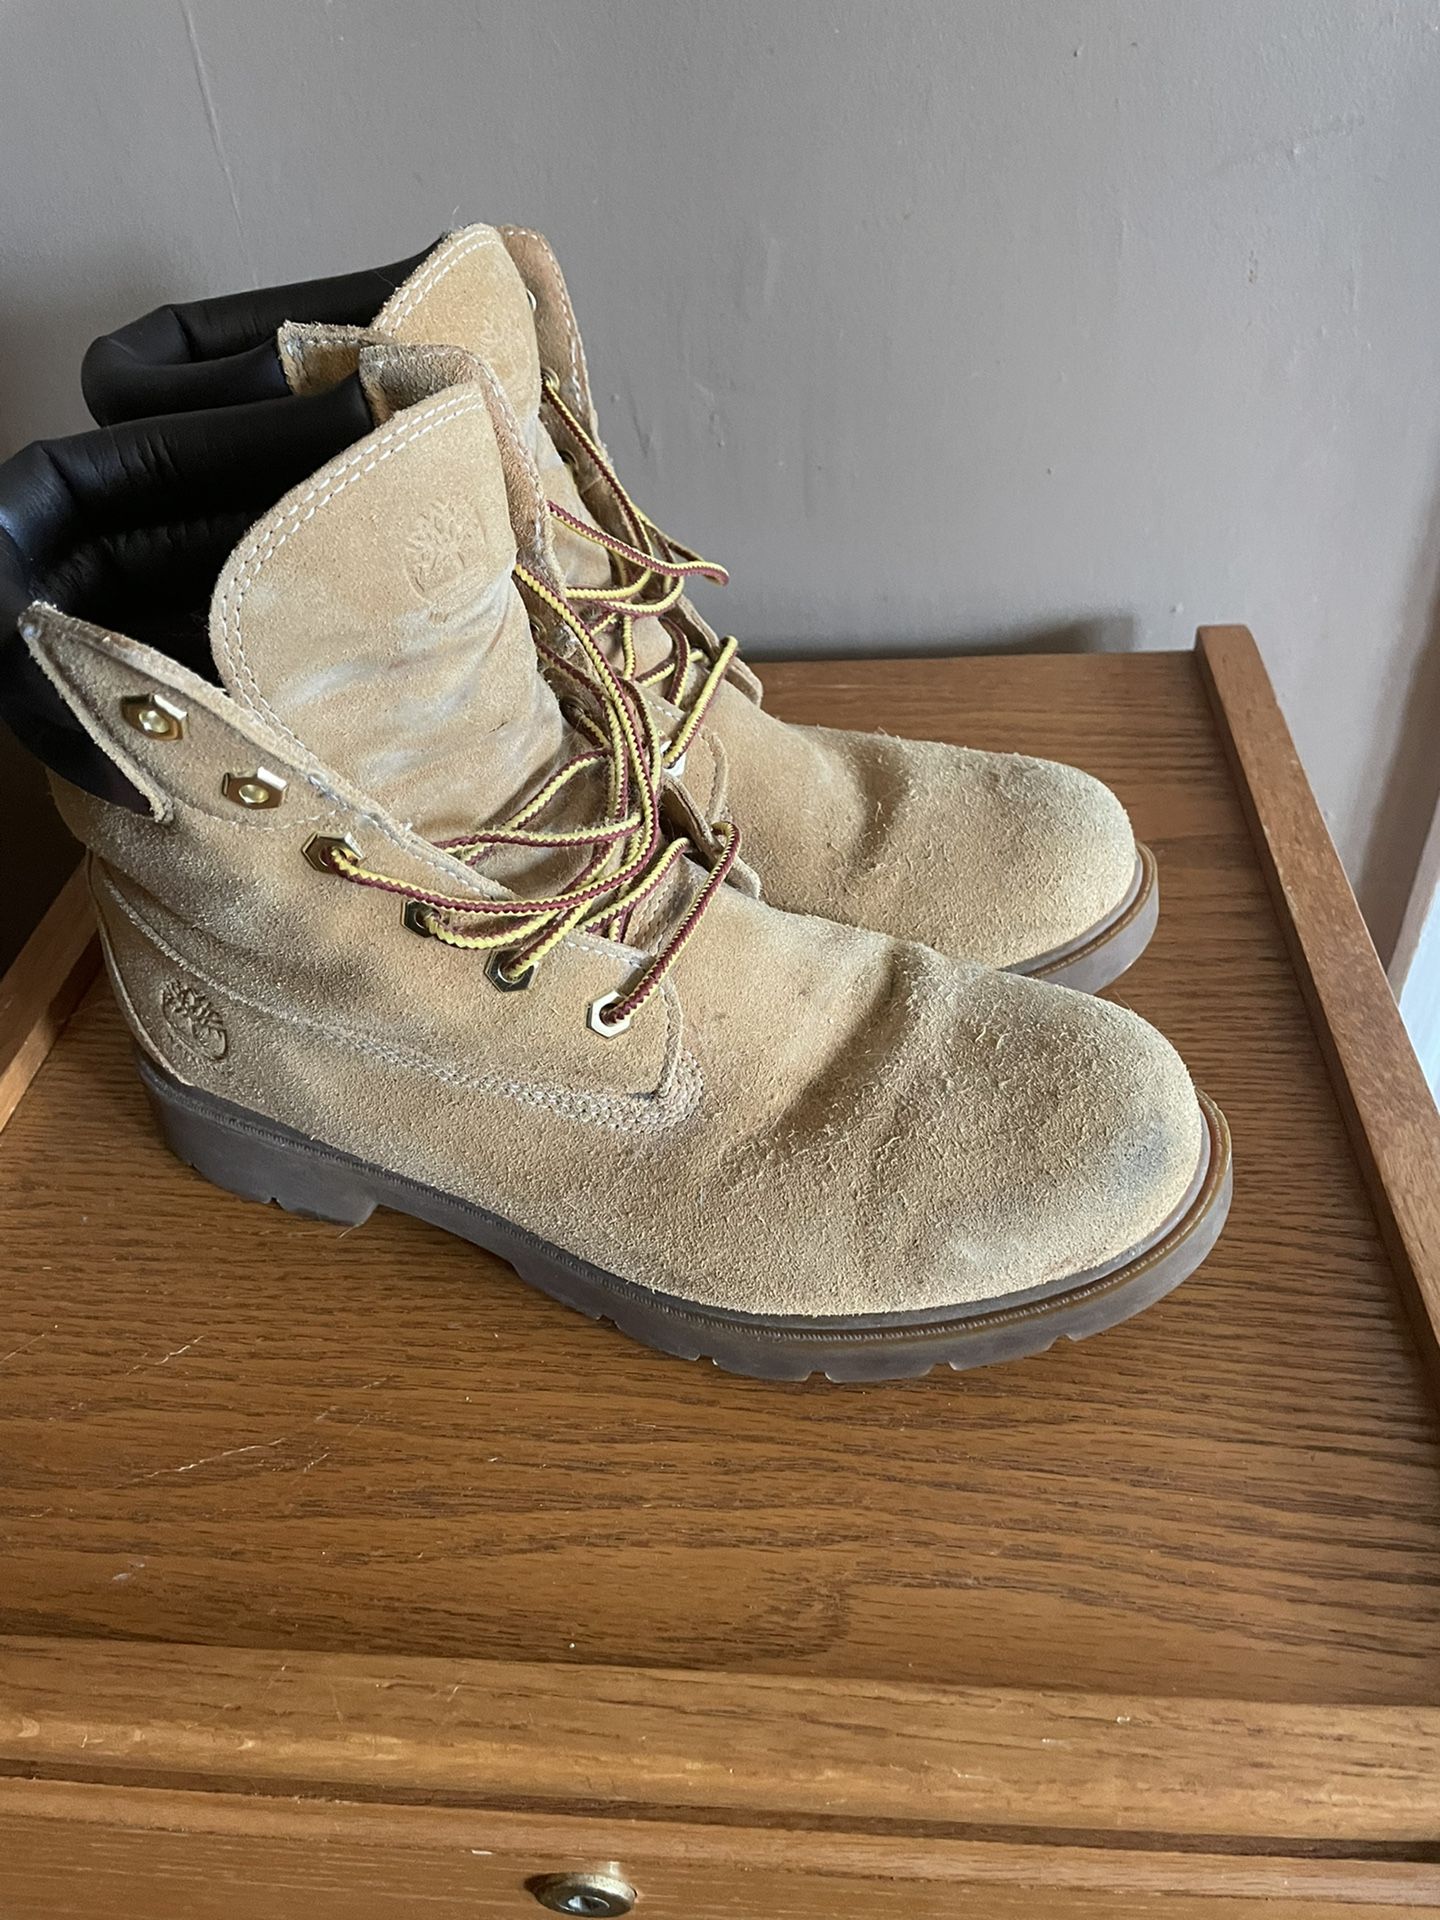 Timberland Boots Work Boots Men’s Size 10